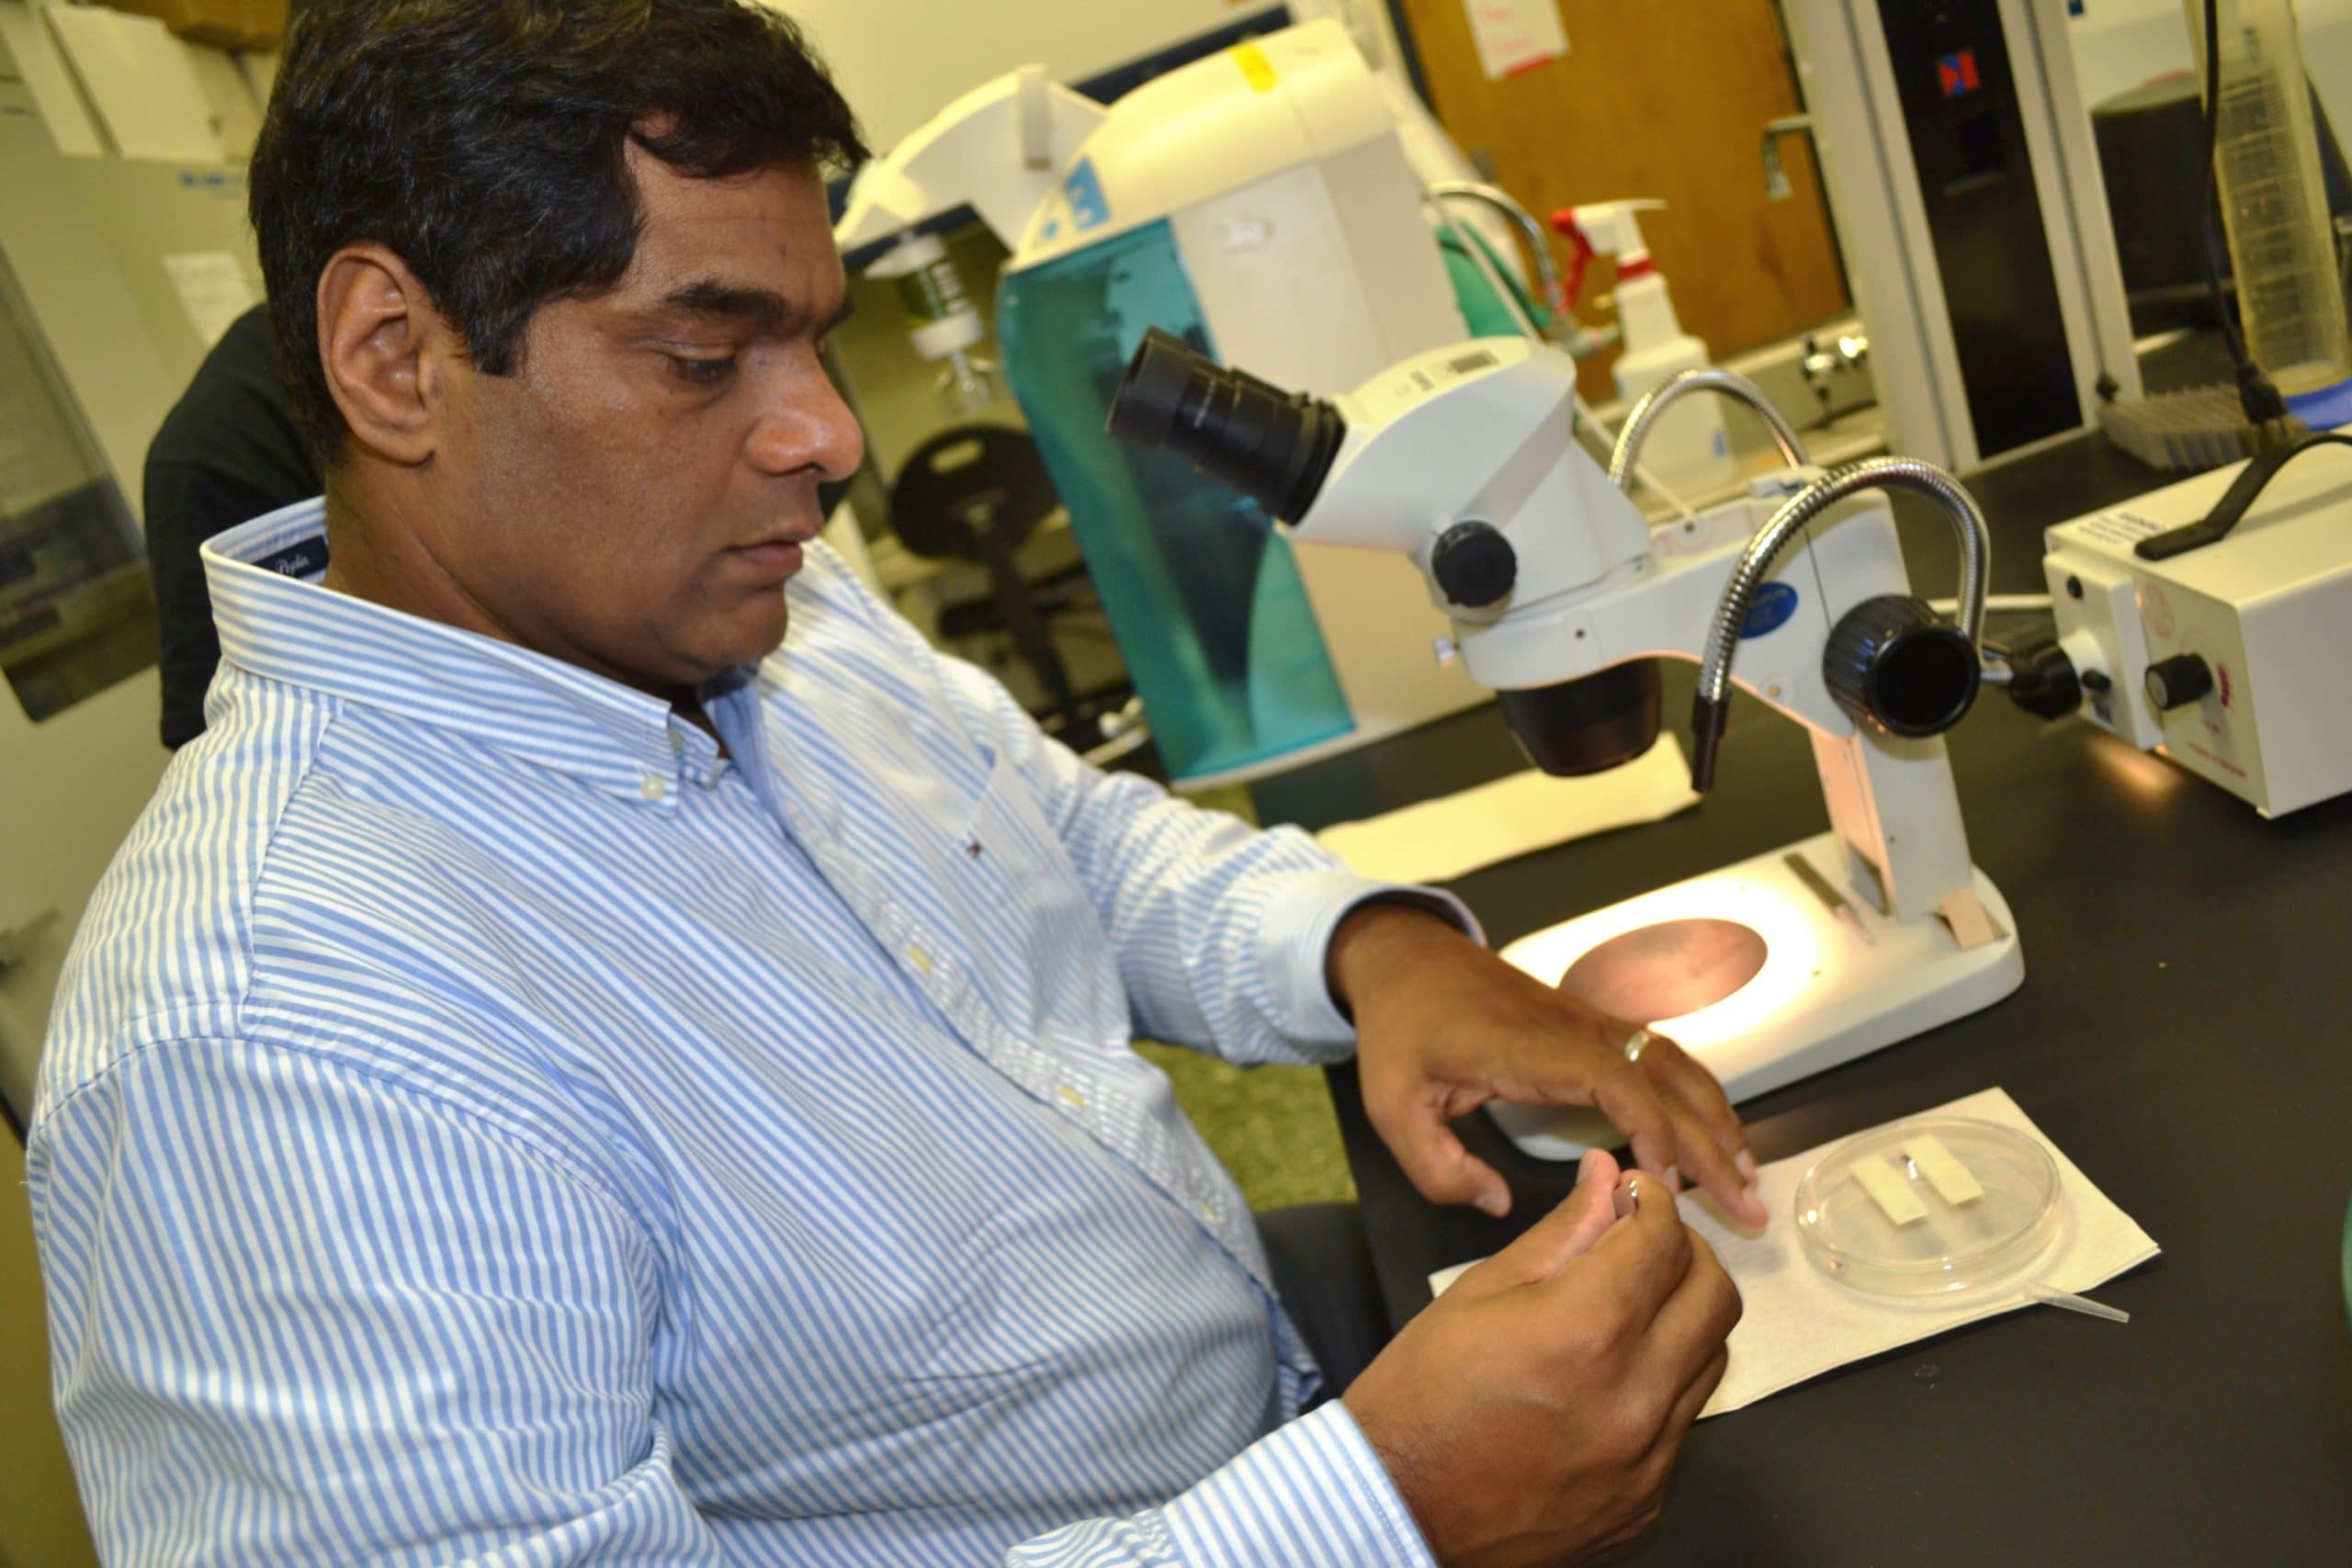 USM’s Dr. Shahid Karim Receives Grant for Research on Infectious Disease